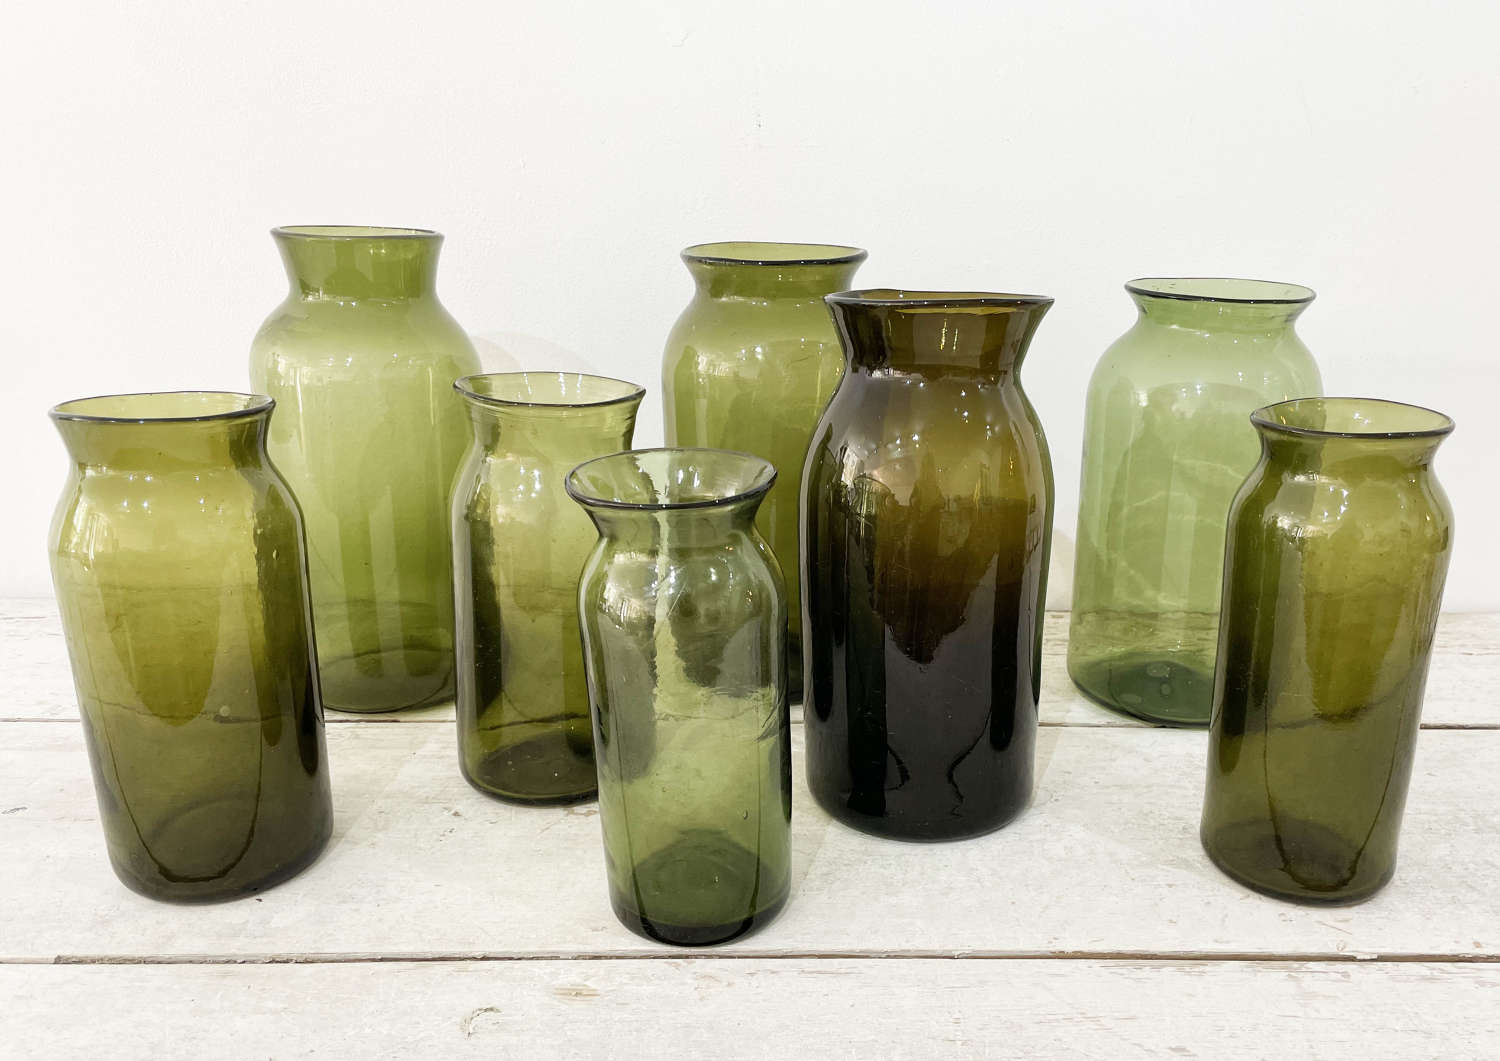 Collection of early 19th c French Glass Jars - circa 1820